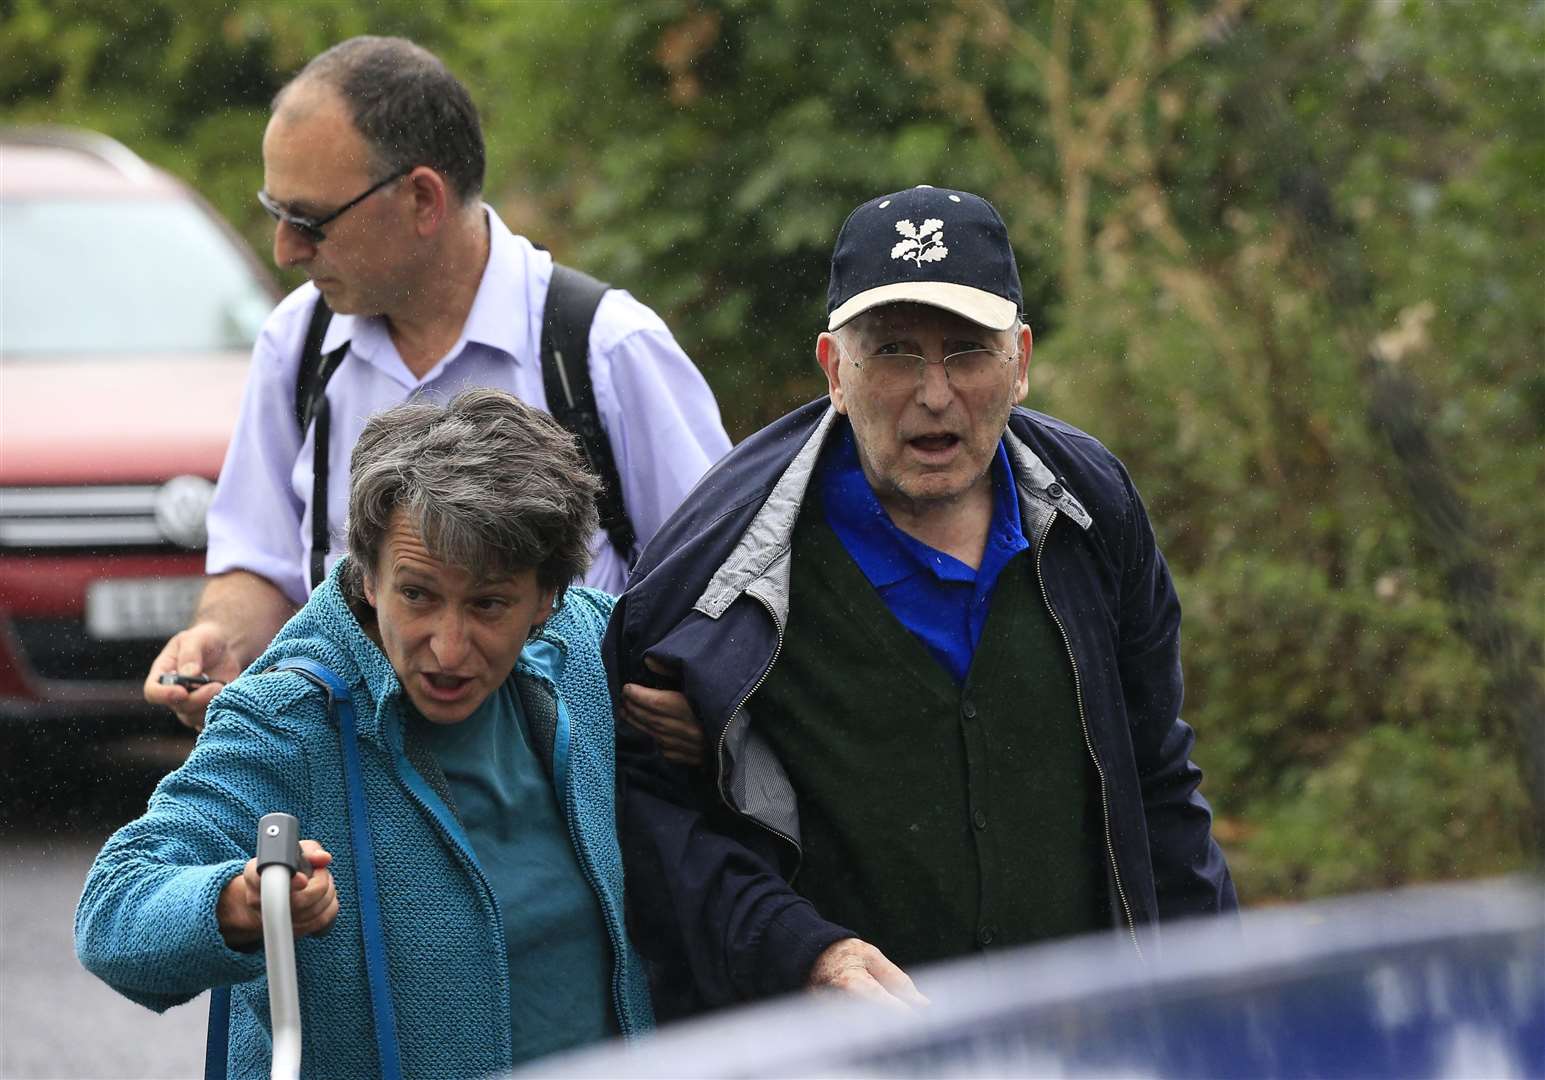 Lord Janner was last seen in public in 2015, when he appeared in court on child abuse allegations (Jonathan Brady/PA)